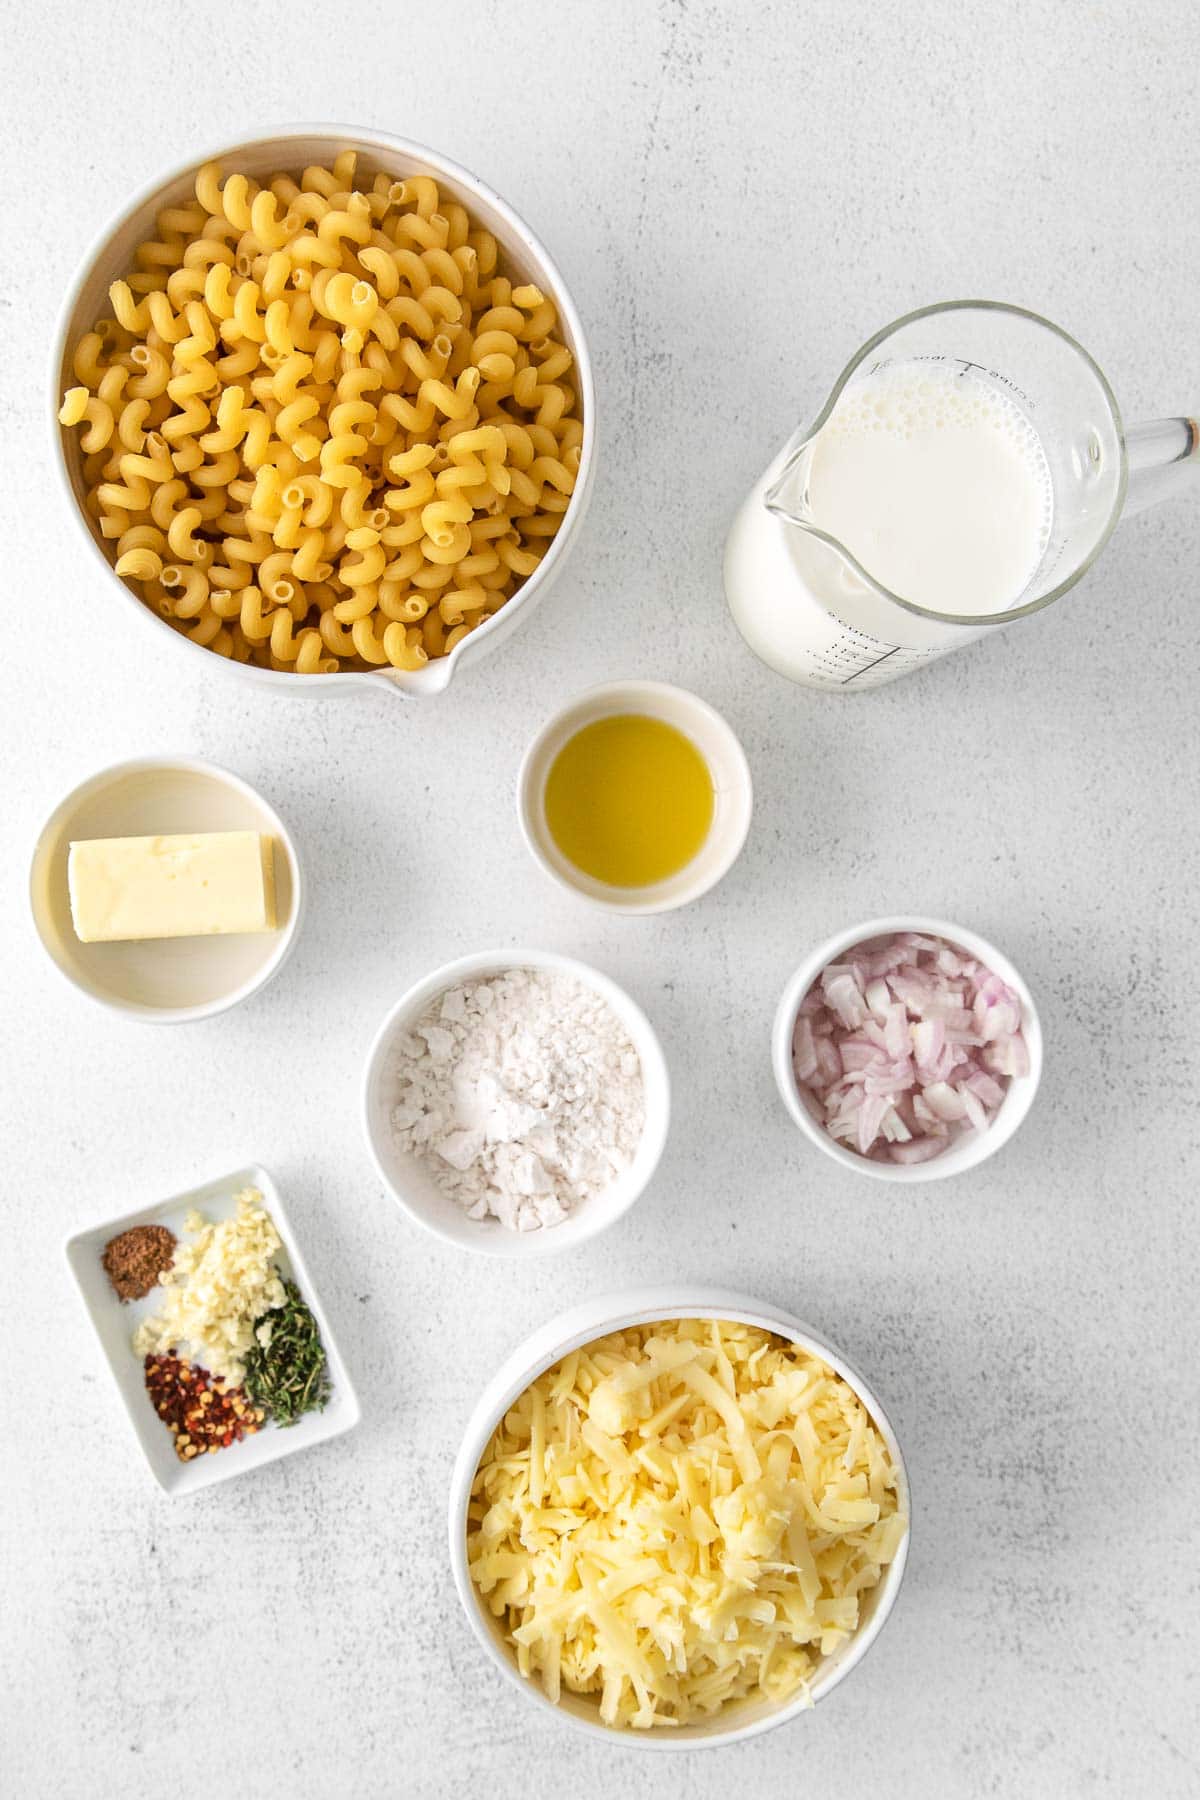 several white bowls with ingredients for homemade mac and cheese - shredded white cheddar cheese, macaroni noodles, milk, butter, flour, onions and spices